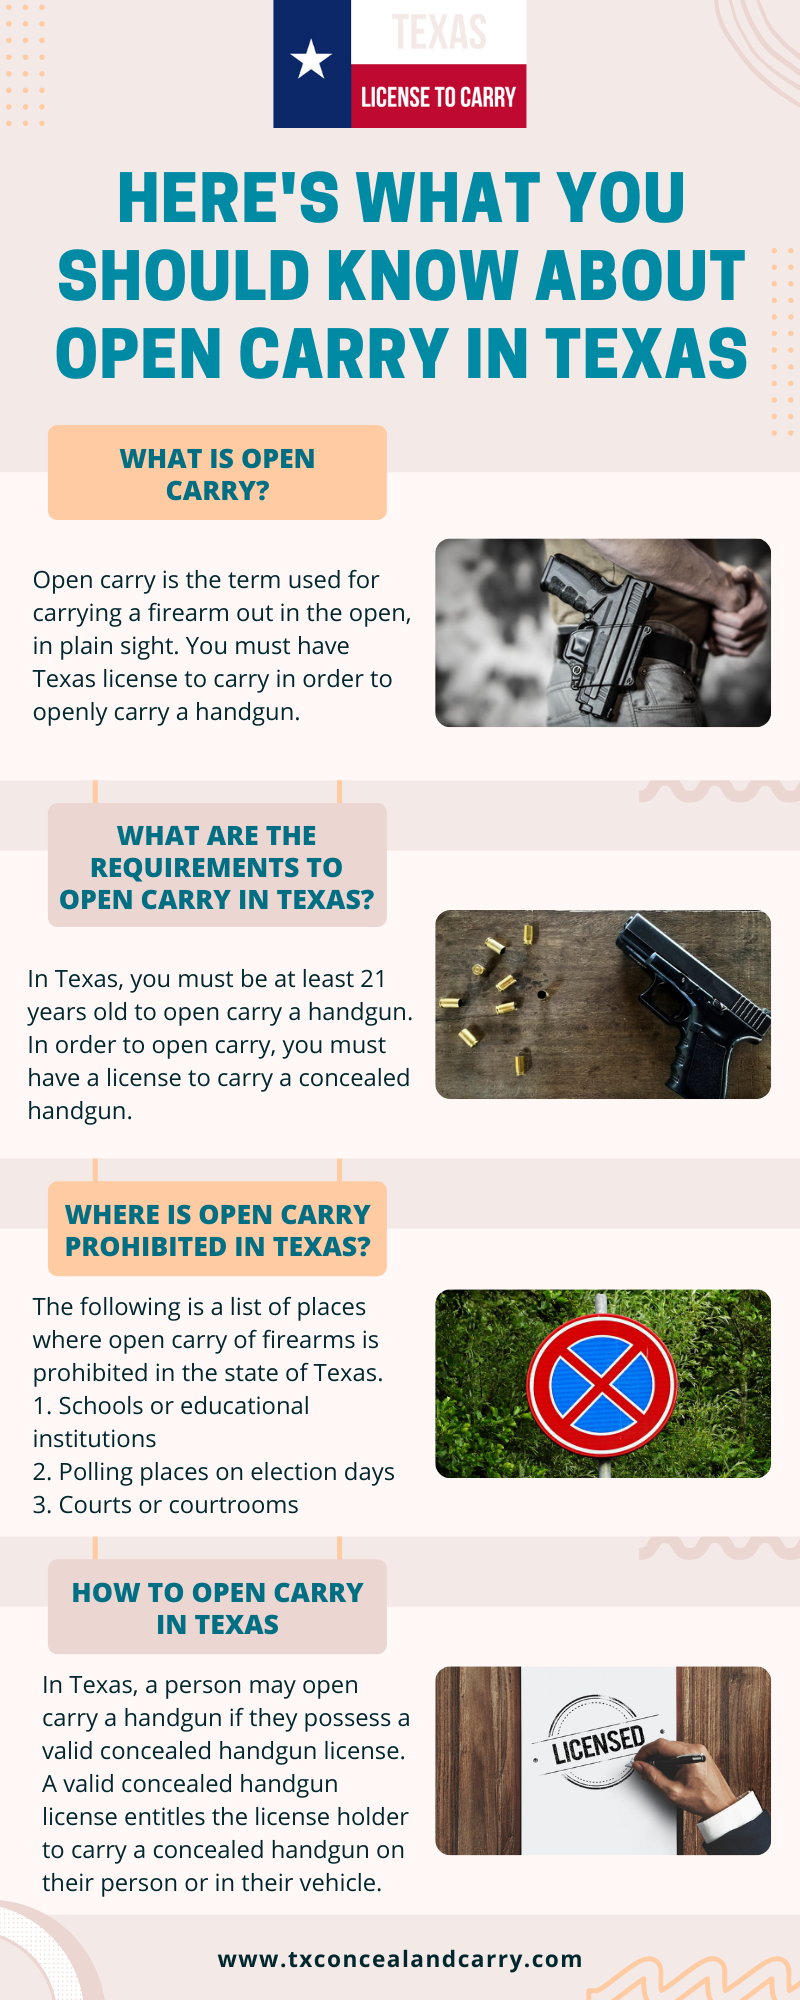 Here’s What You Should Know About Open Carry In Texas